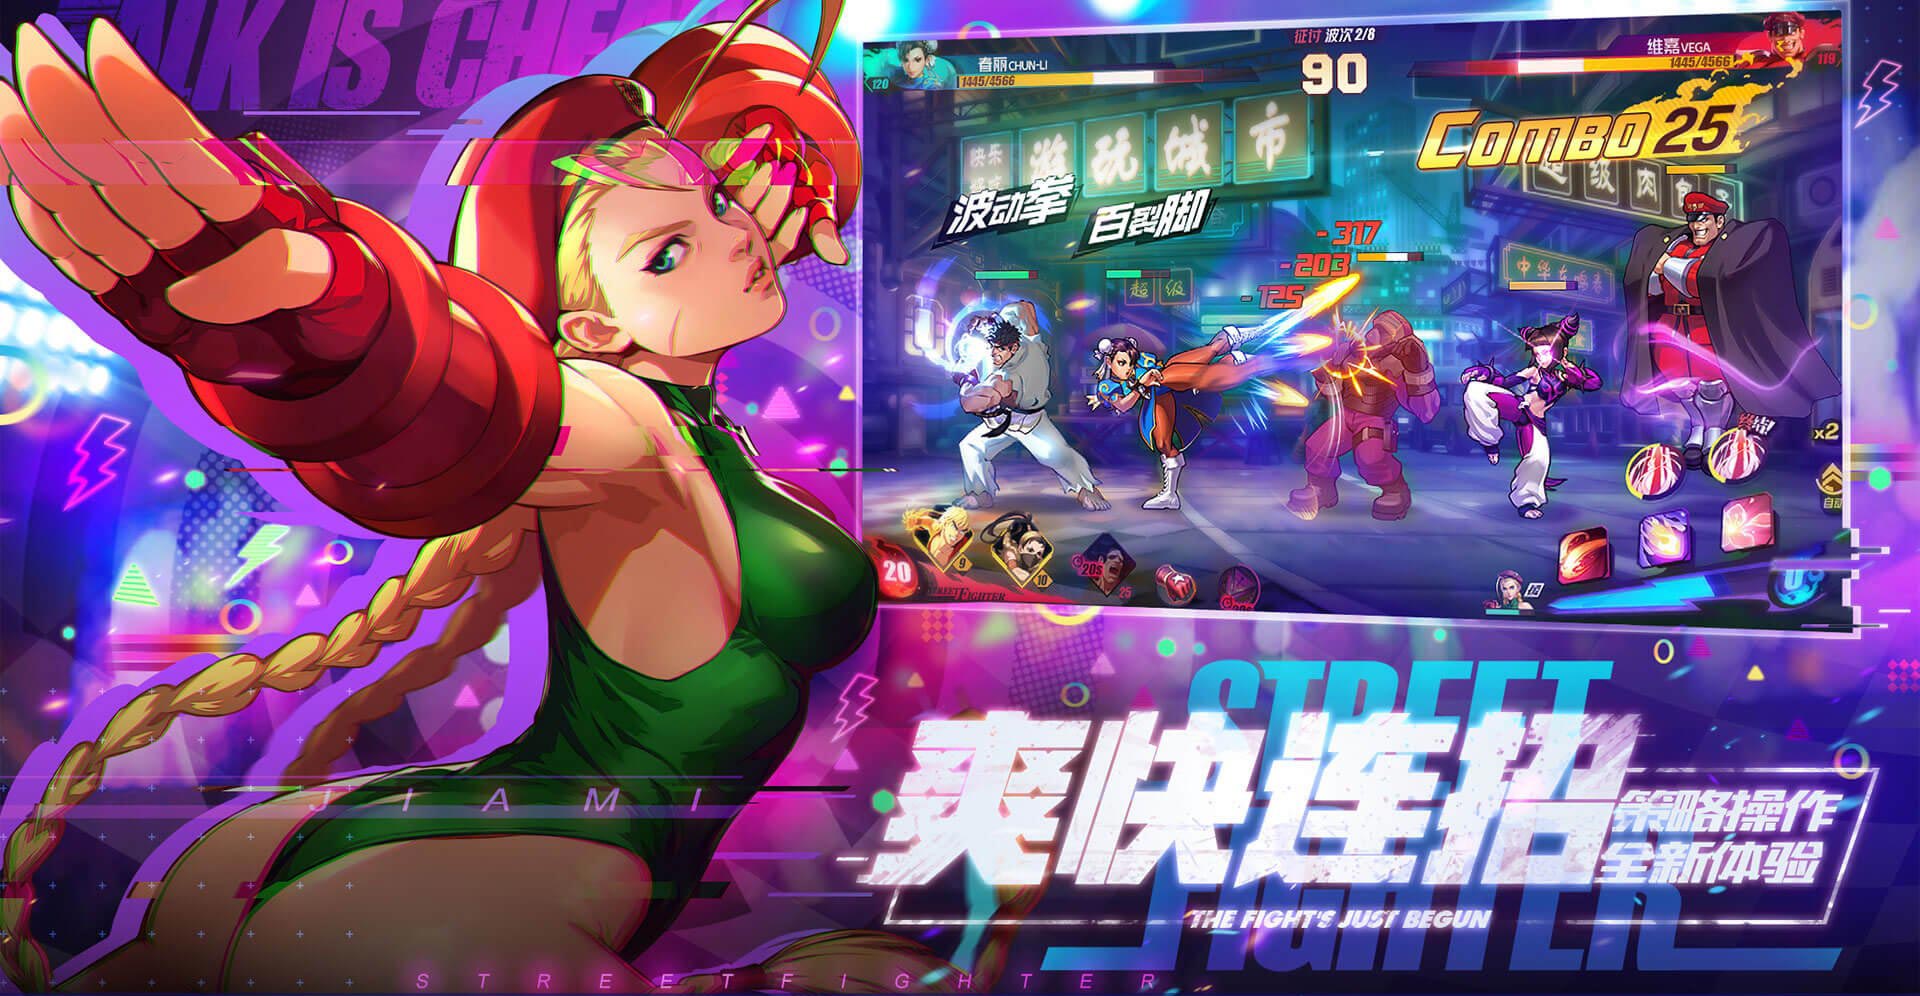 Street Fighter Duel Preview, Official Artwork, New Trailer Features